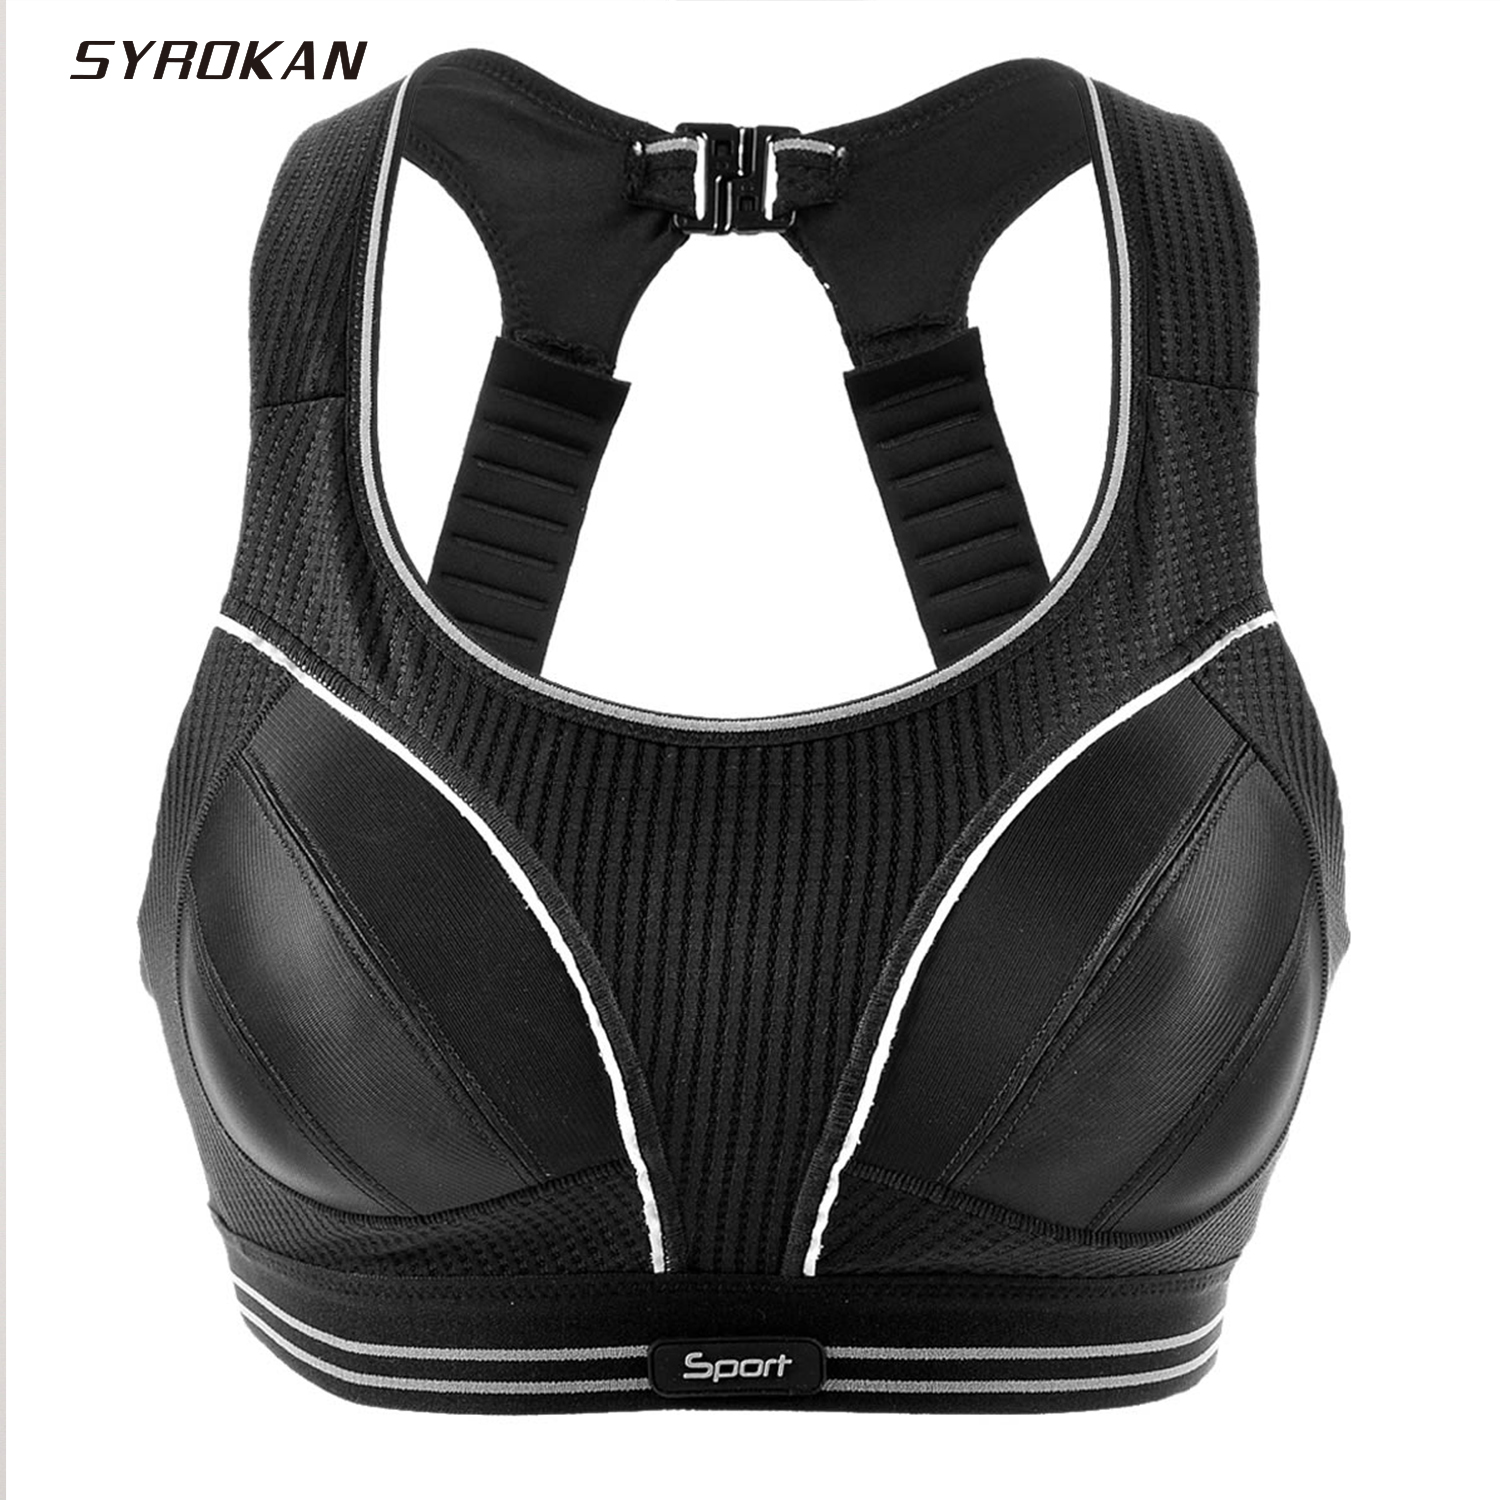 SYROKAN Women's Max Control Solid Plus Size High Impact Underwire Sports Bra  - Price history & Review, AliExpress Seller - SYROKAN Official Store